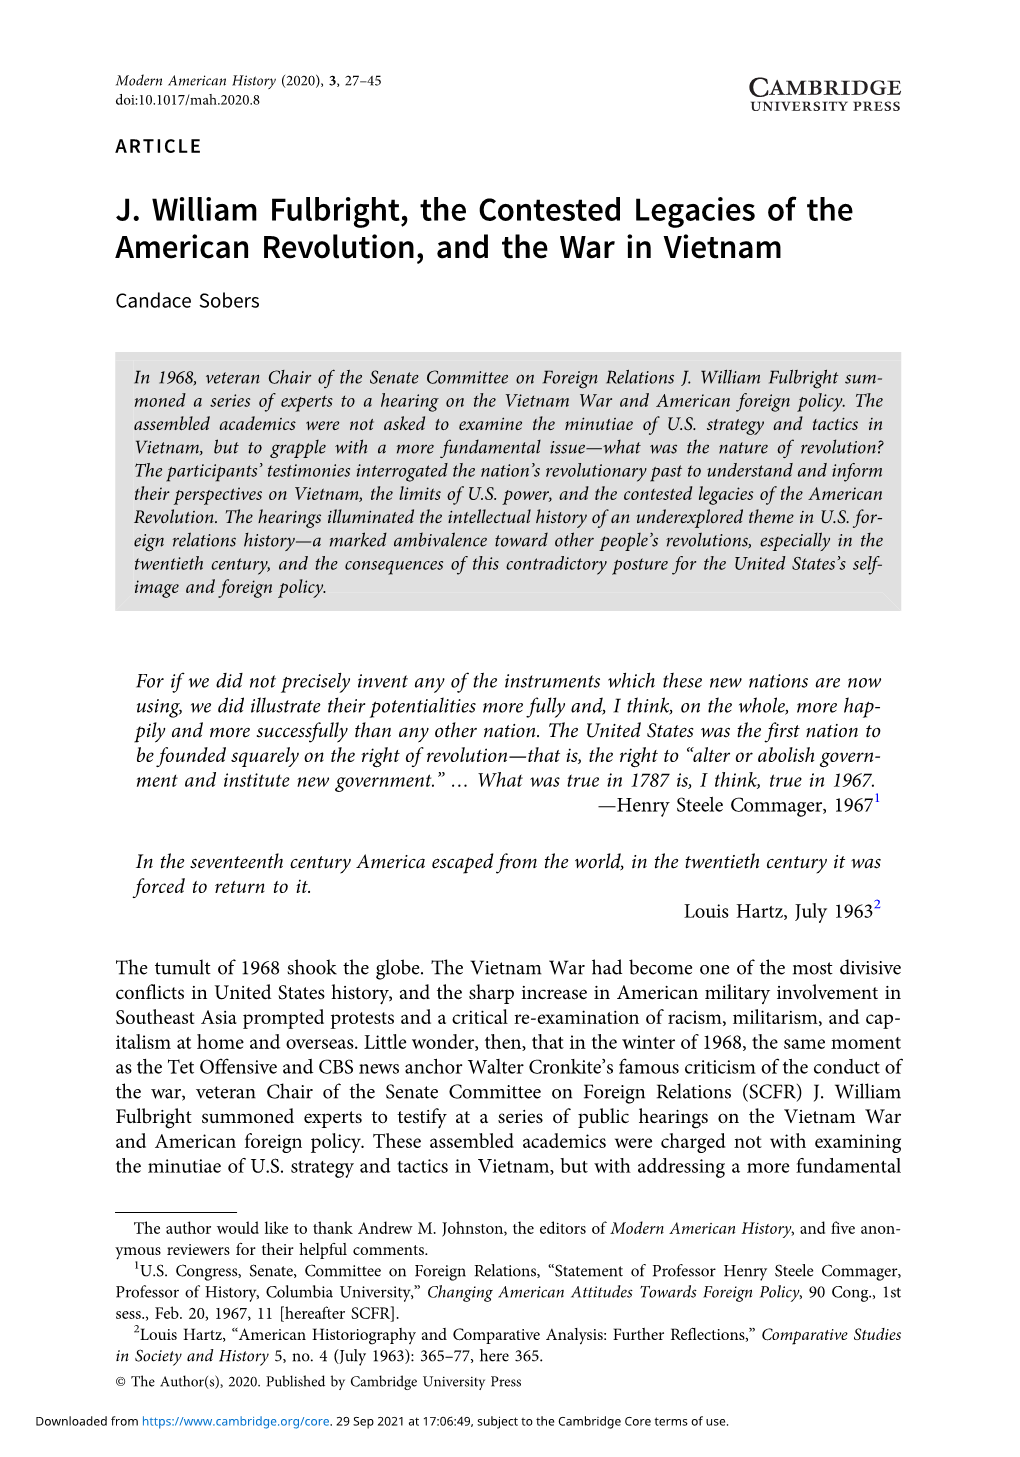 J. William Fulbright, the Contested Legacies of the American Revolution, and the War in Vietnam Candace Sobers